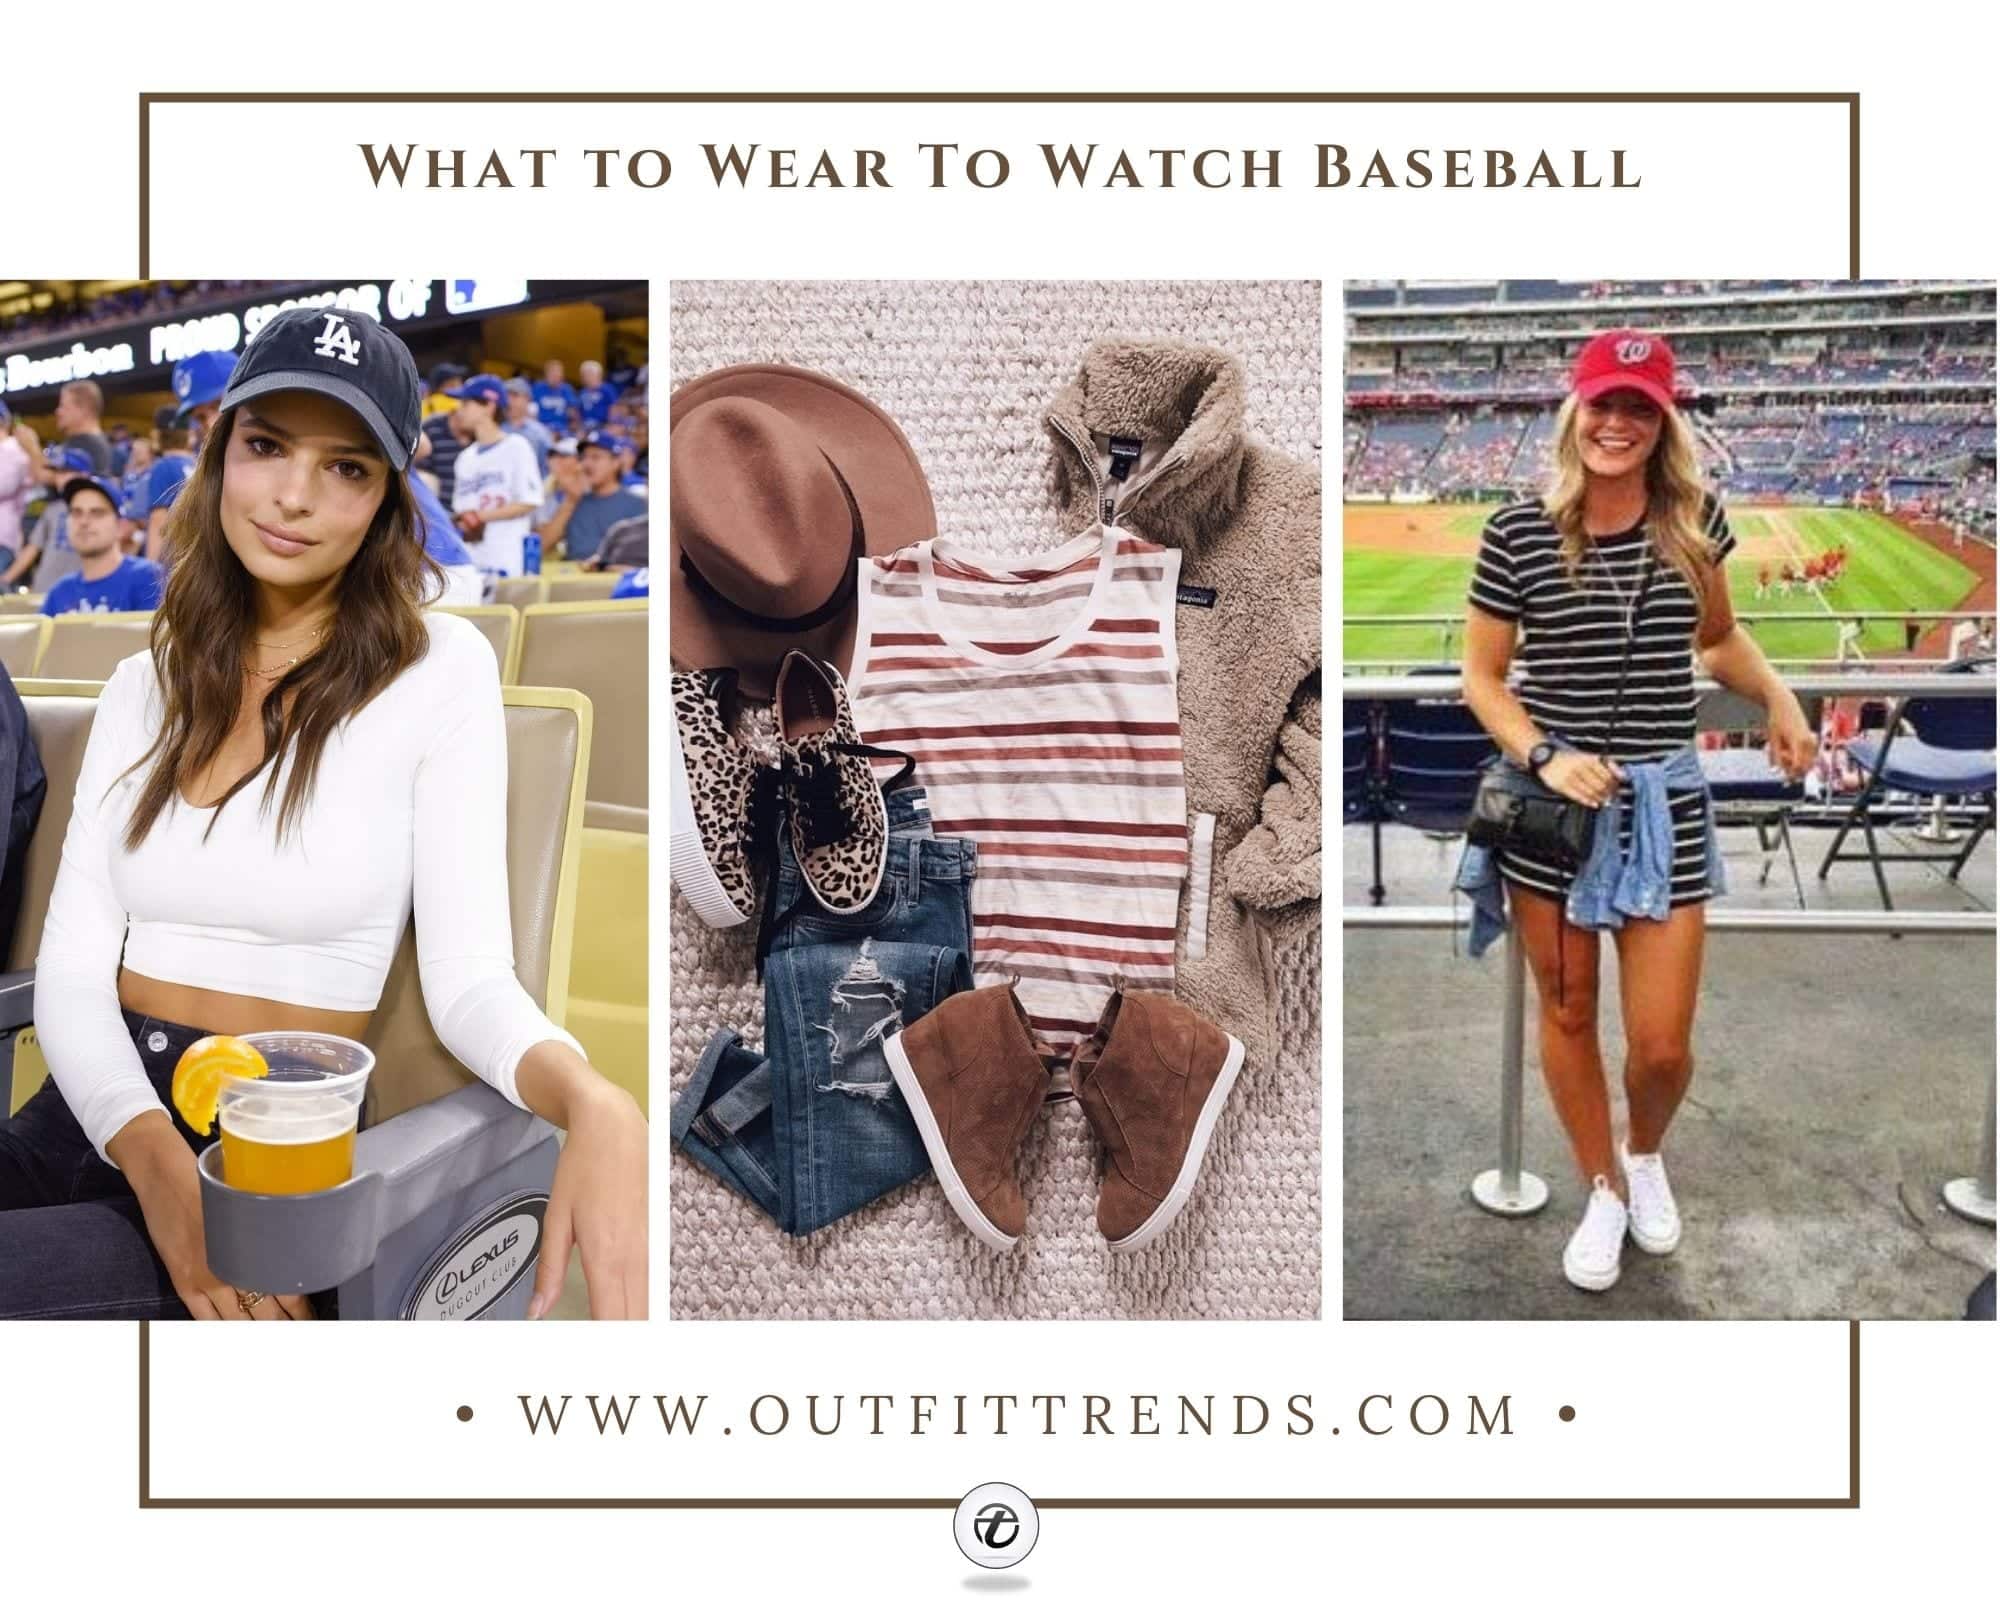 Baseball Game Outfit Idea  Sports mom outfit, Softball mom outfit, Baseball  game outfits